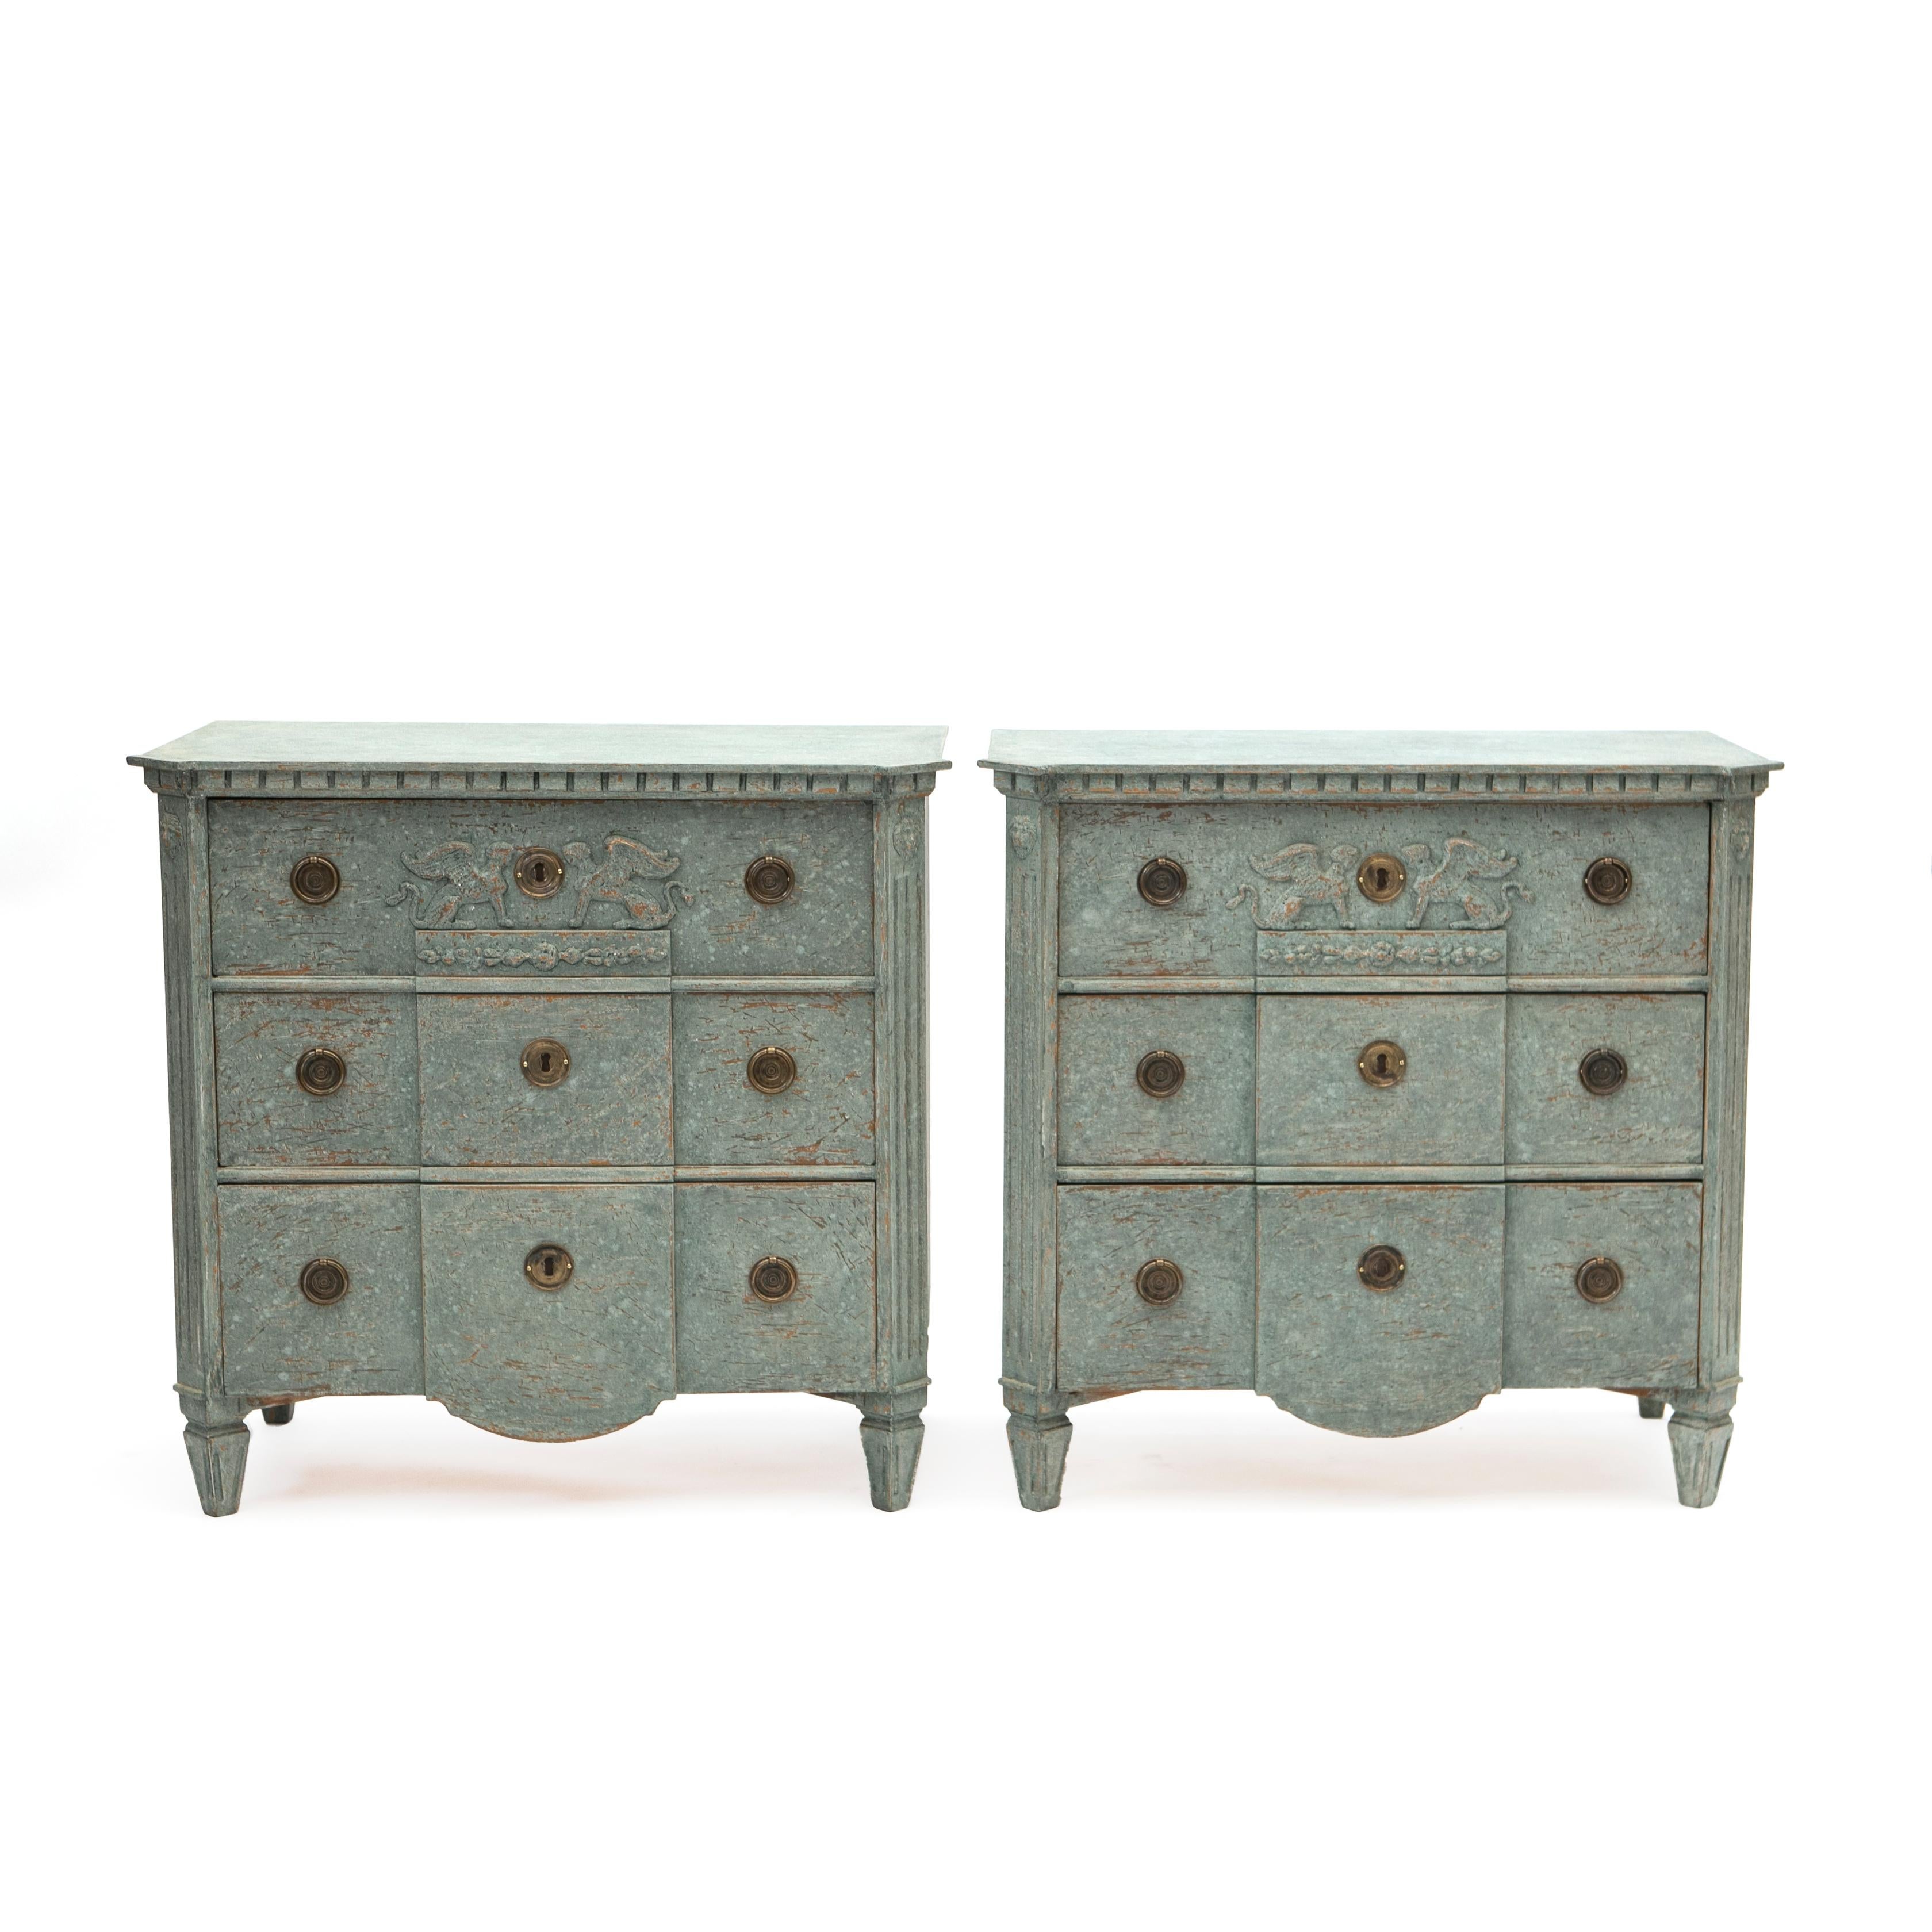 A pair of Swedish Gustavian style breakfront chest of three drawers, dating from the 19th century, painted in a light blue-green color scheme.

Each chest features a top with canted corners sitting above a front with three break drawers, top drawers